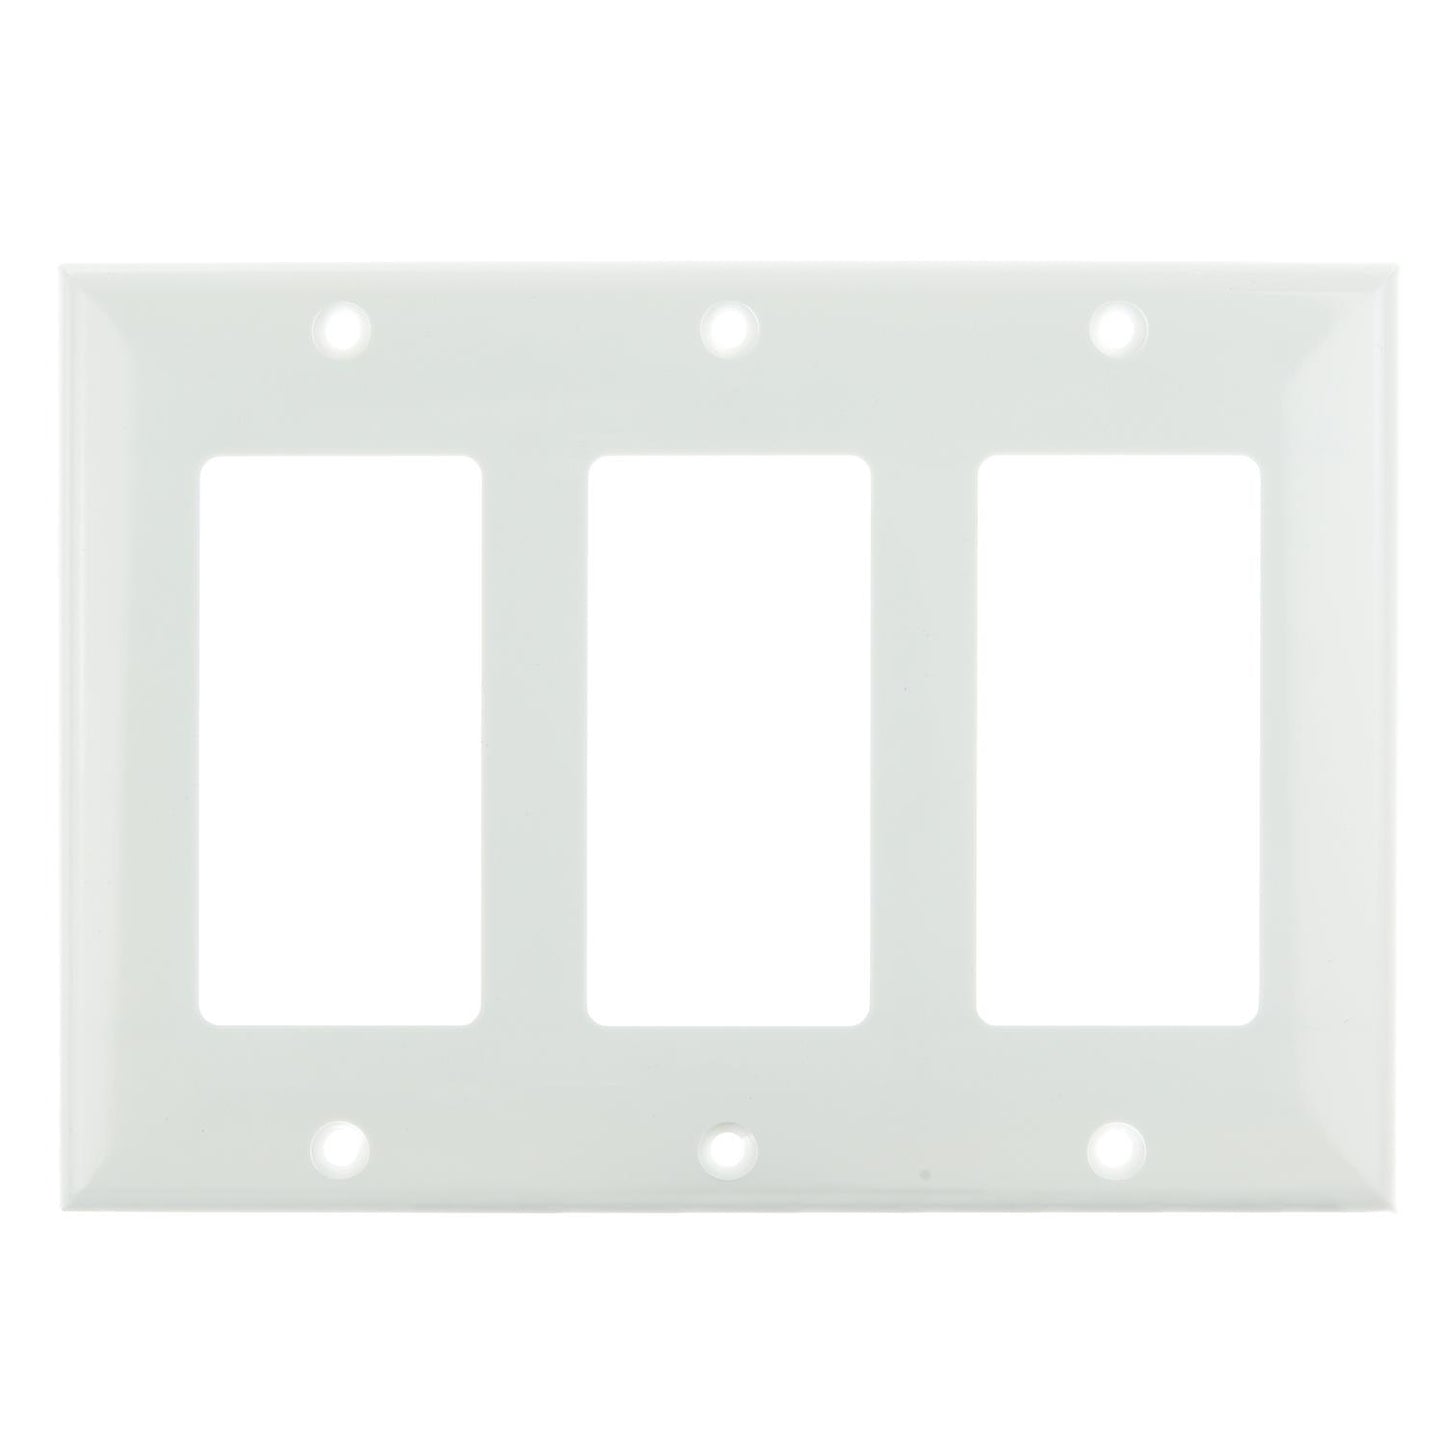 Sunlite E303/W 3 Gang Decorative Switch and Receptacle Plate, White